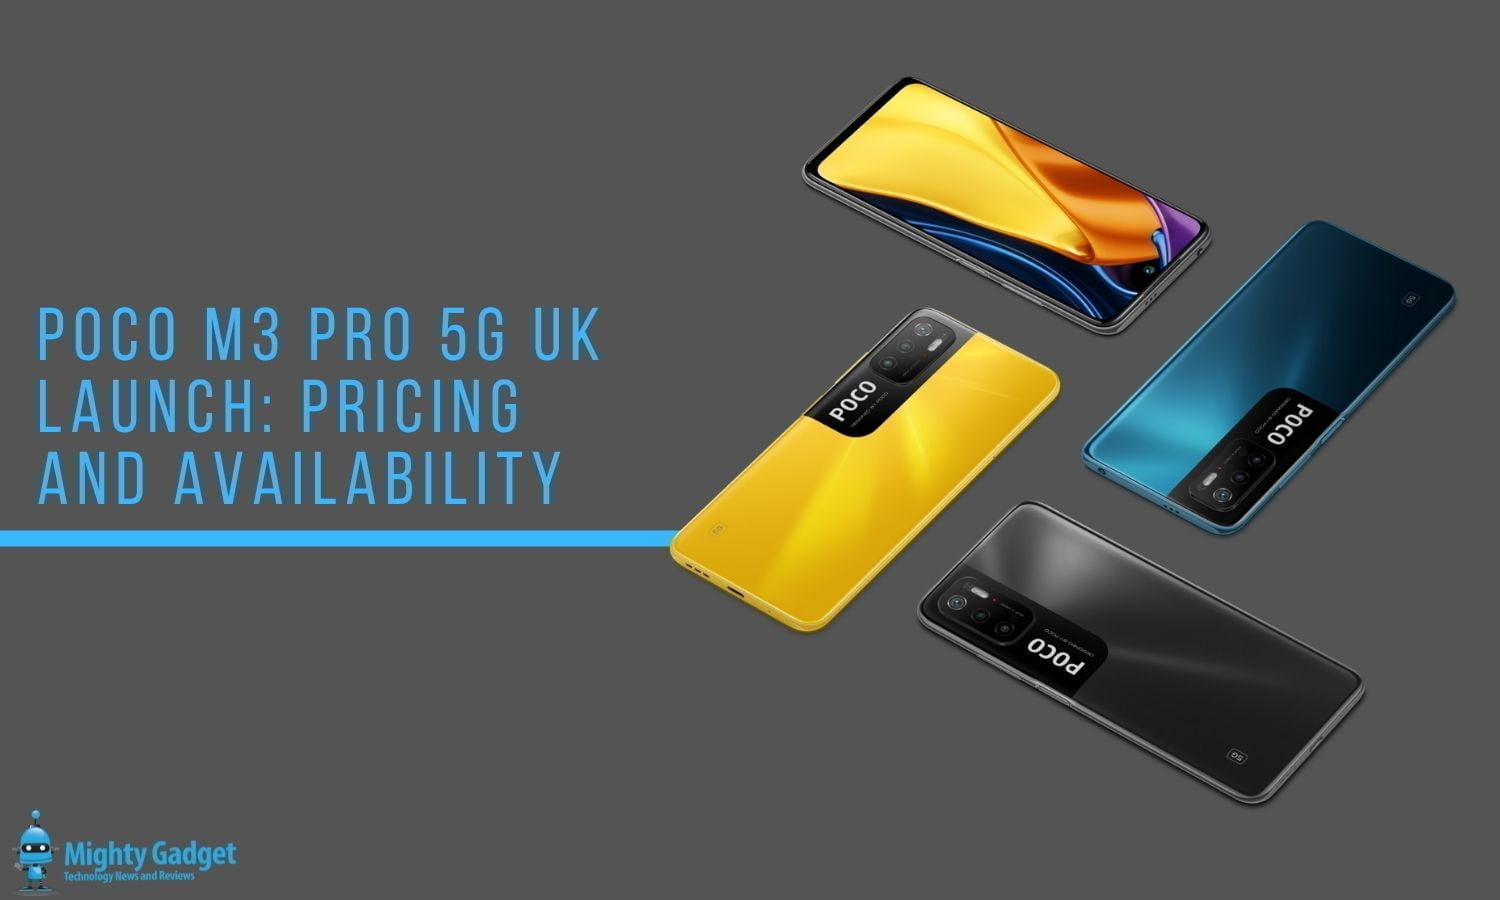 POCO M3 Pro 5G will be priced from £139 (RRP £179) available on the 8th of July in the UK